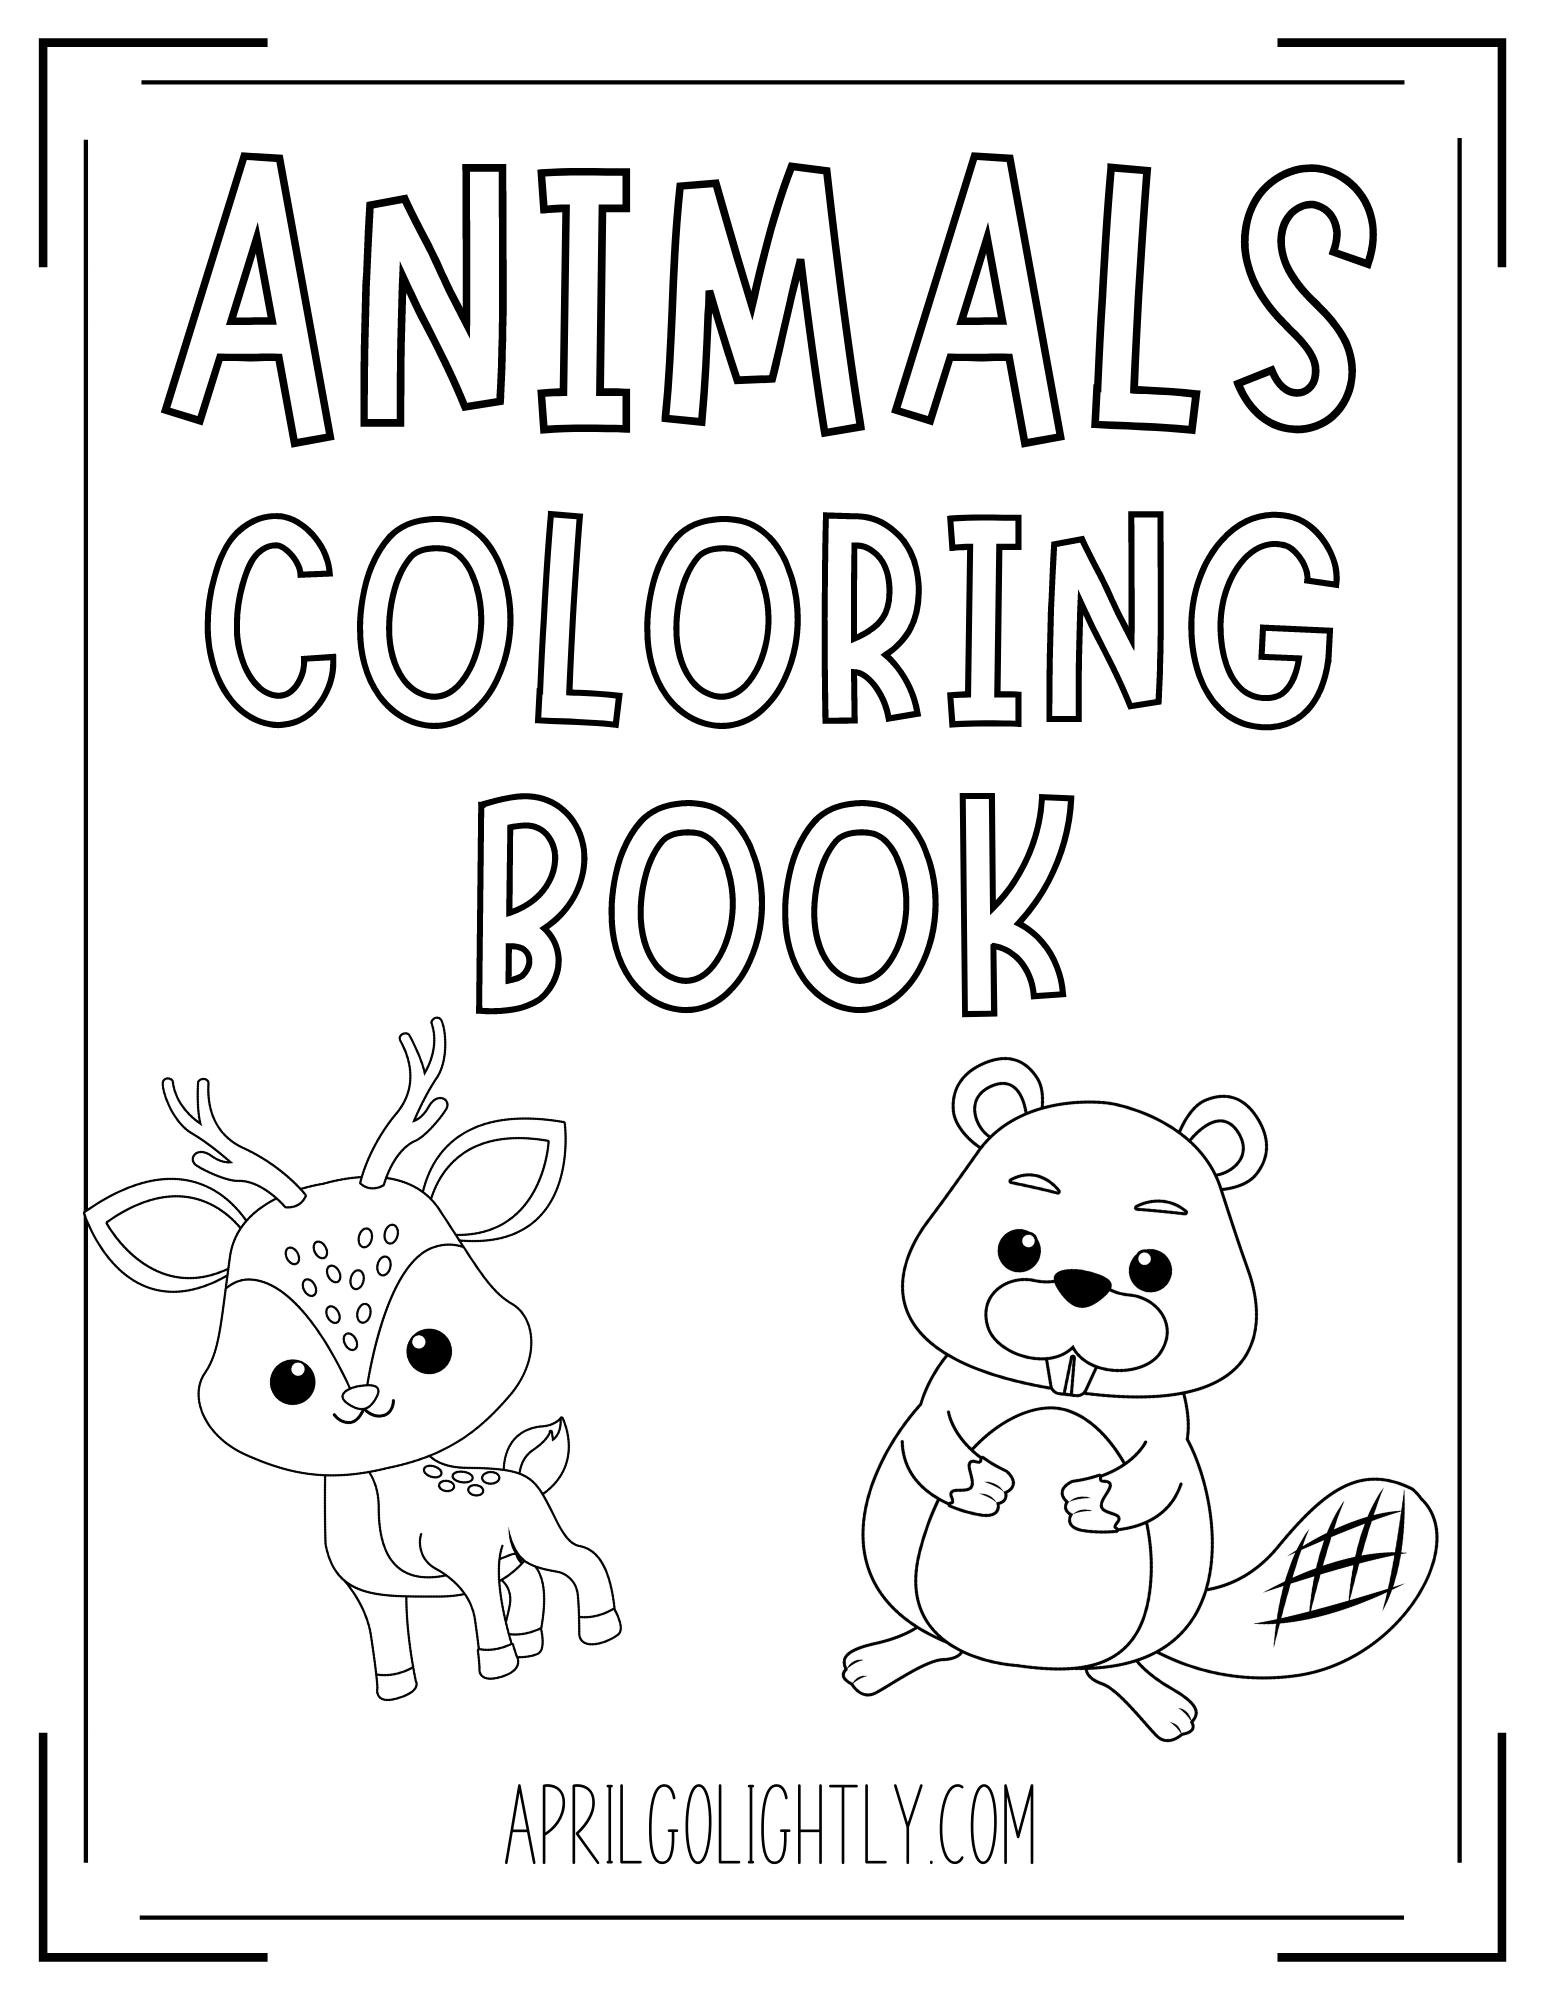 FREE Printable Animals Coloring Book   April Golightly